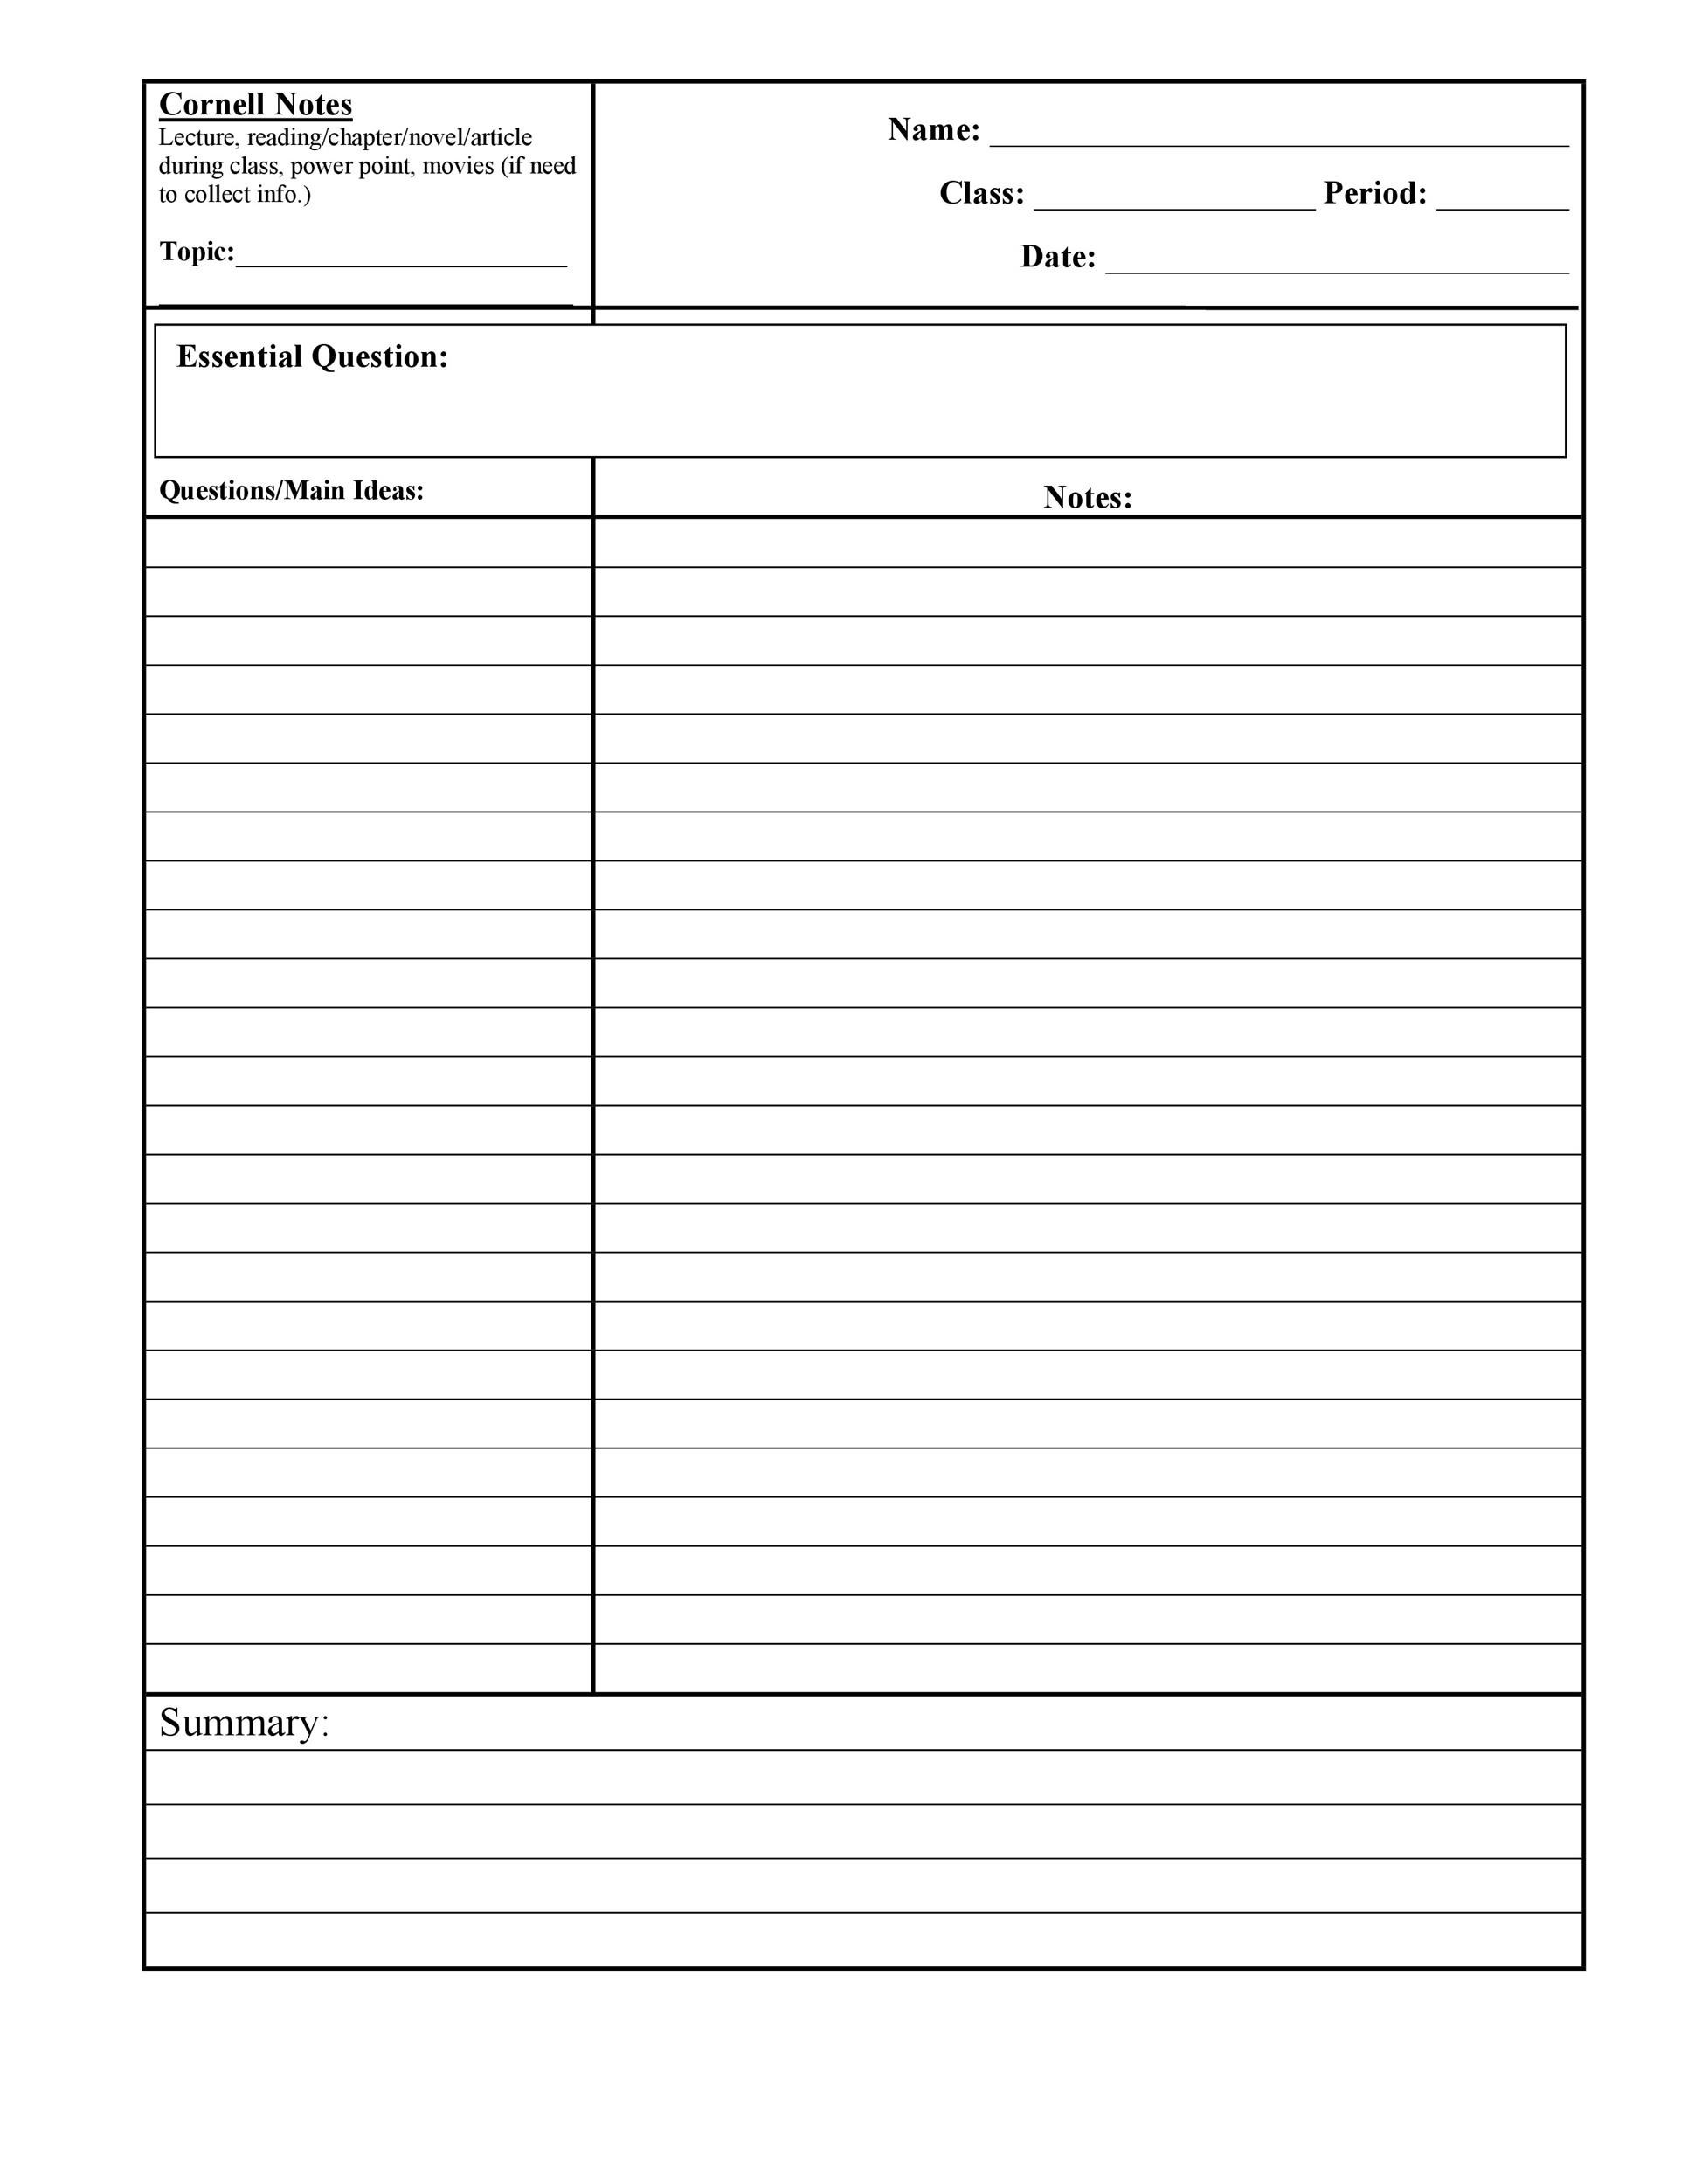 36 Cornell Notes Templates & Examples [Word, PDF] ᐅ TemplateLab